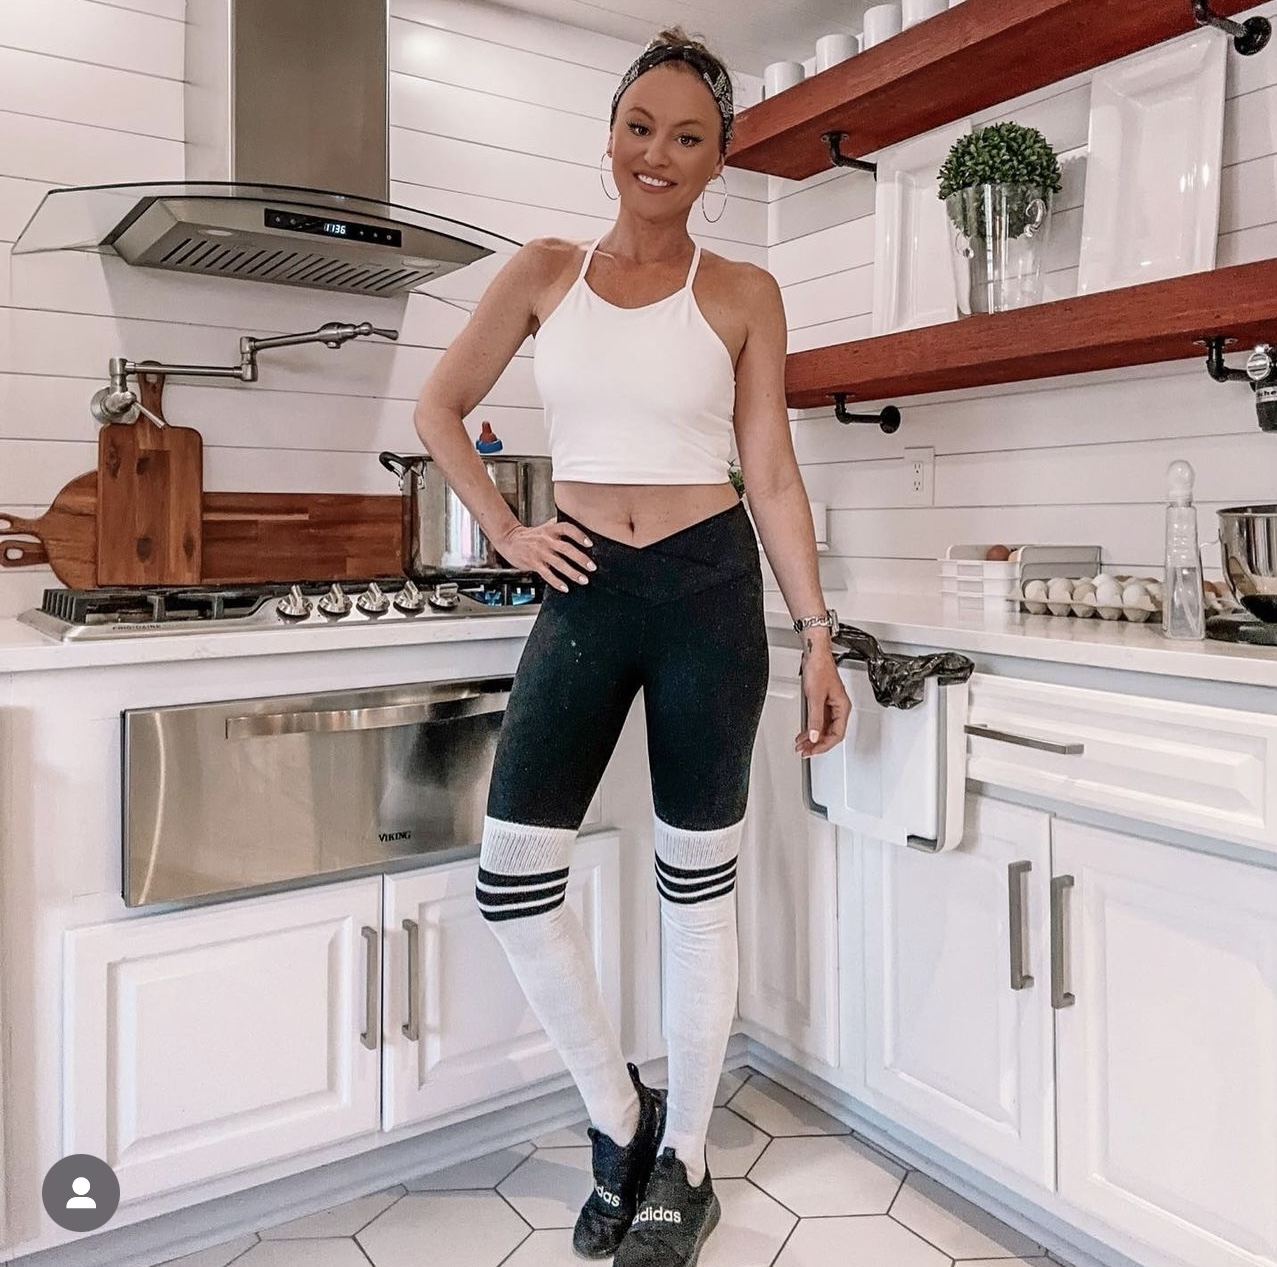 girl in kitchen cooking wearing thigh highs over leggings